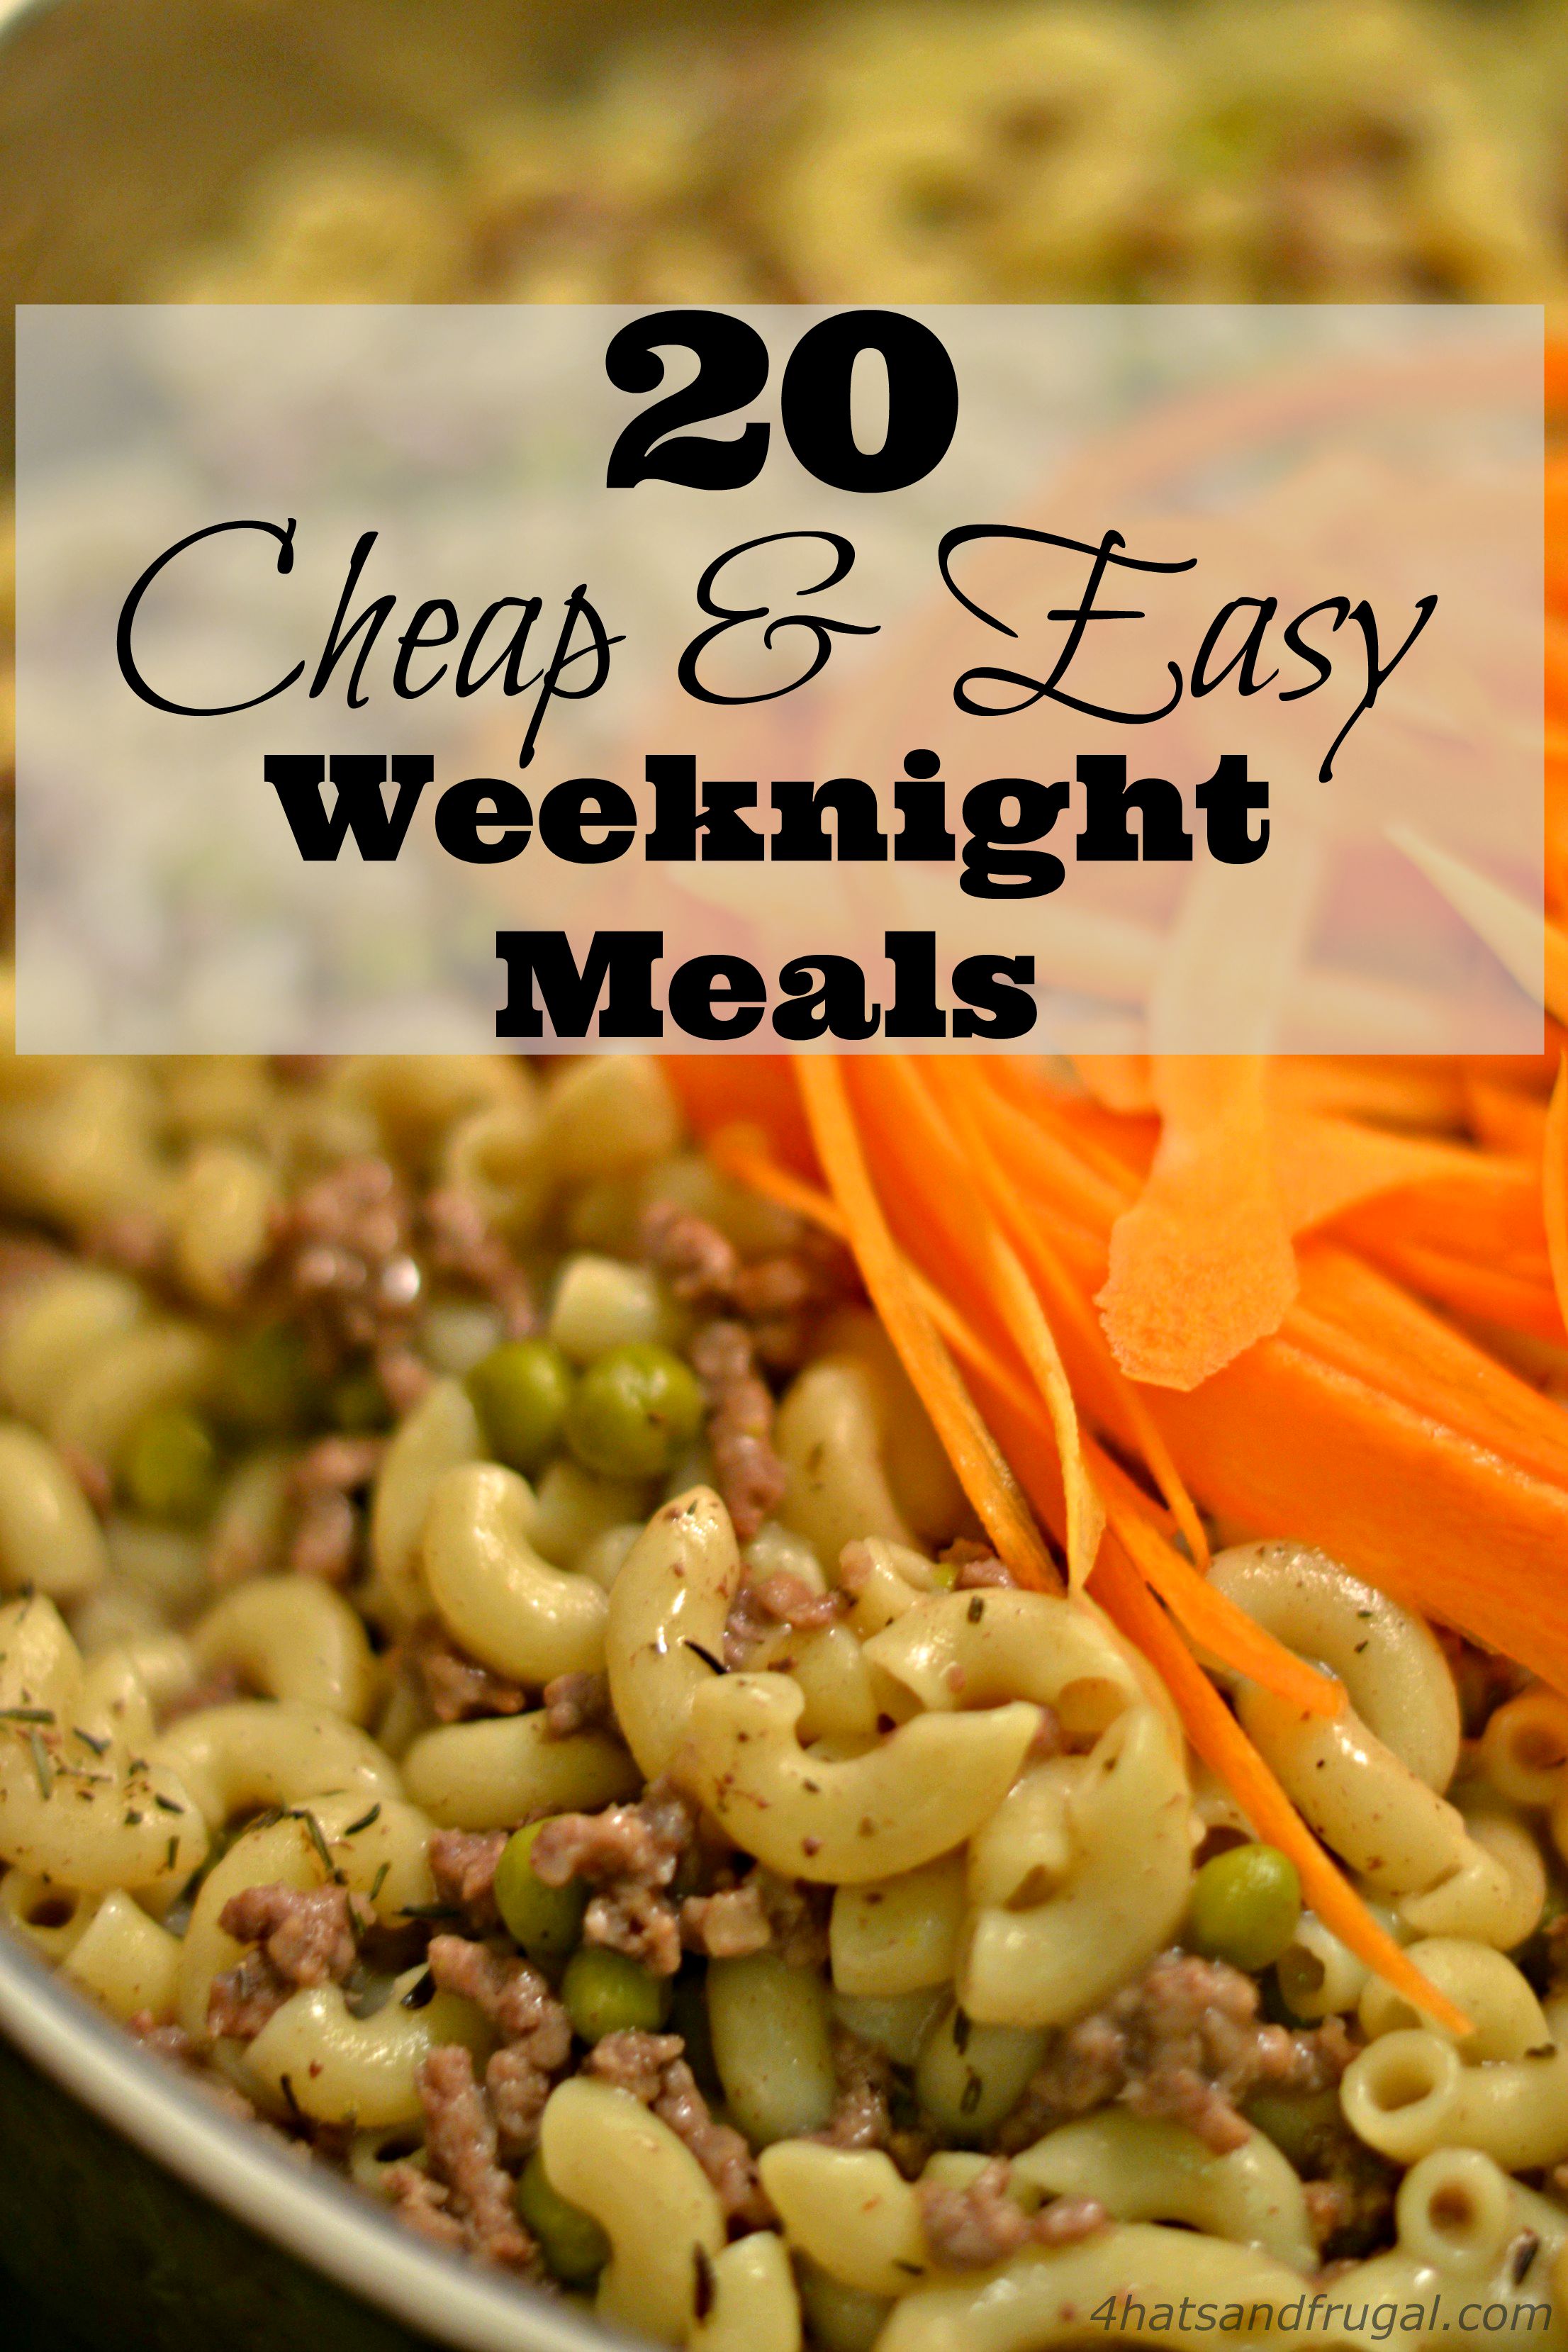 20 Cheap Easy Weeknight Meals 4 Hats And Frugal